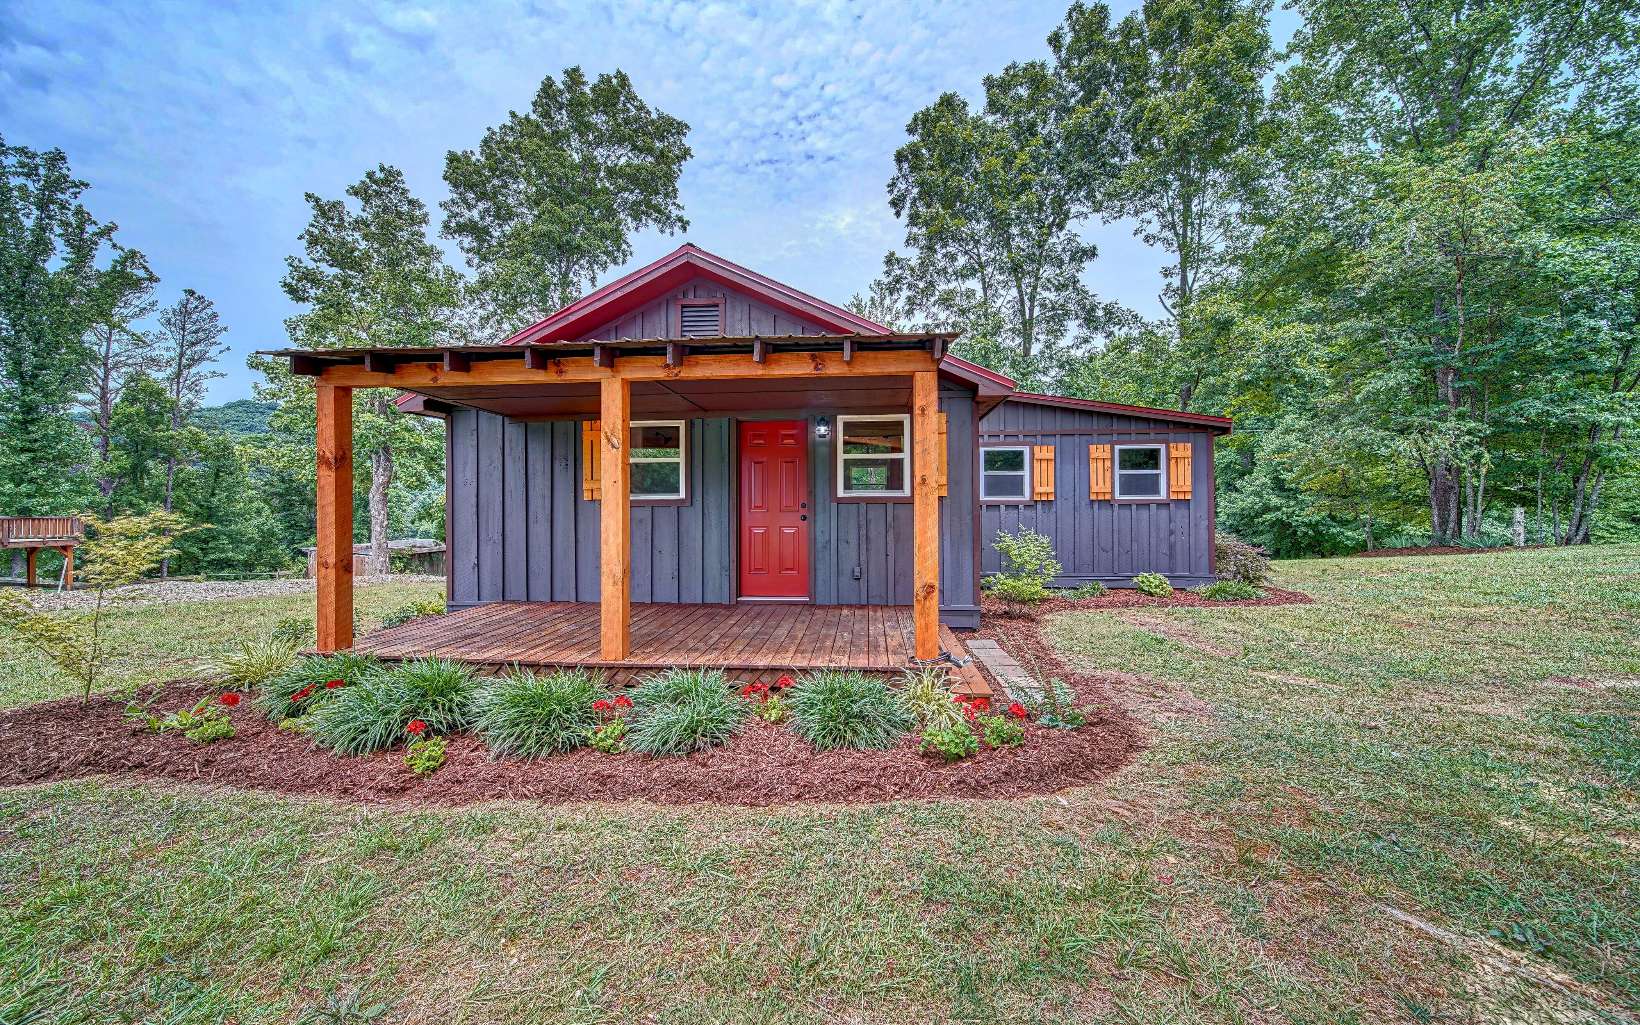 ***OPEN HOUSE FRIDAY & SATURDAY 10AM - 2PM*** July 8th and 9th! ***Look No Further*** Here's your cabin retreat in the most sought after section of Union County. 1/1 Cabin that has been recently upgraded in every aspect. Perfect spot to pull in with your RV and stay for that needed break. Located near the base of Brasstown Bald. Fabulous view of Blood Mountain to the south. Minutes from Vogel State Park, Brasstown Bald, hiking on the AT and other approach trails. Enjoy your own private pond with an assortment of fish. Unrestricted property for your time in the mountains.